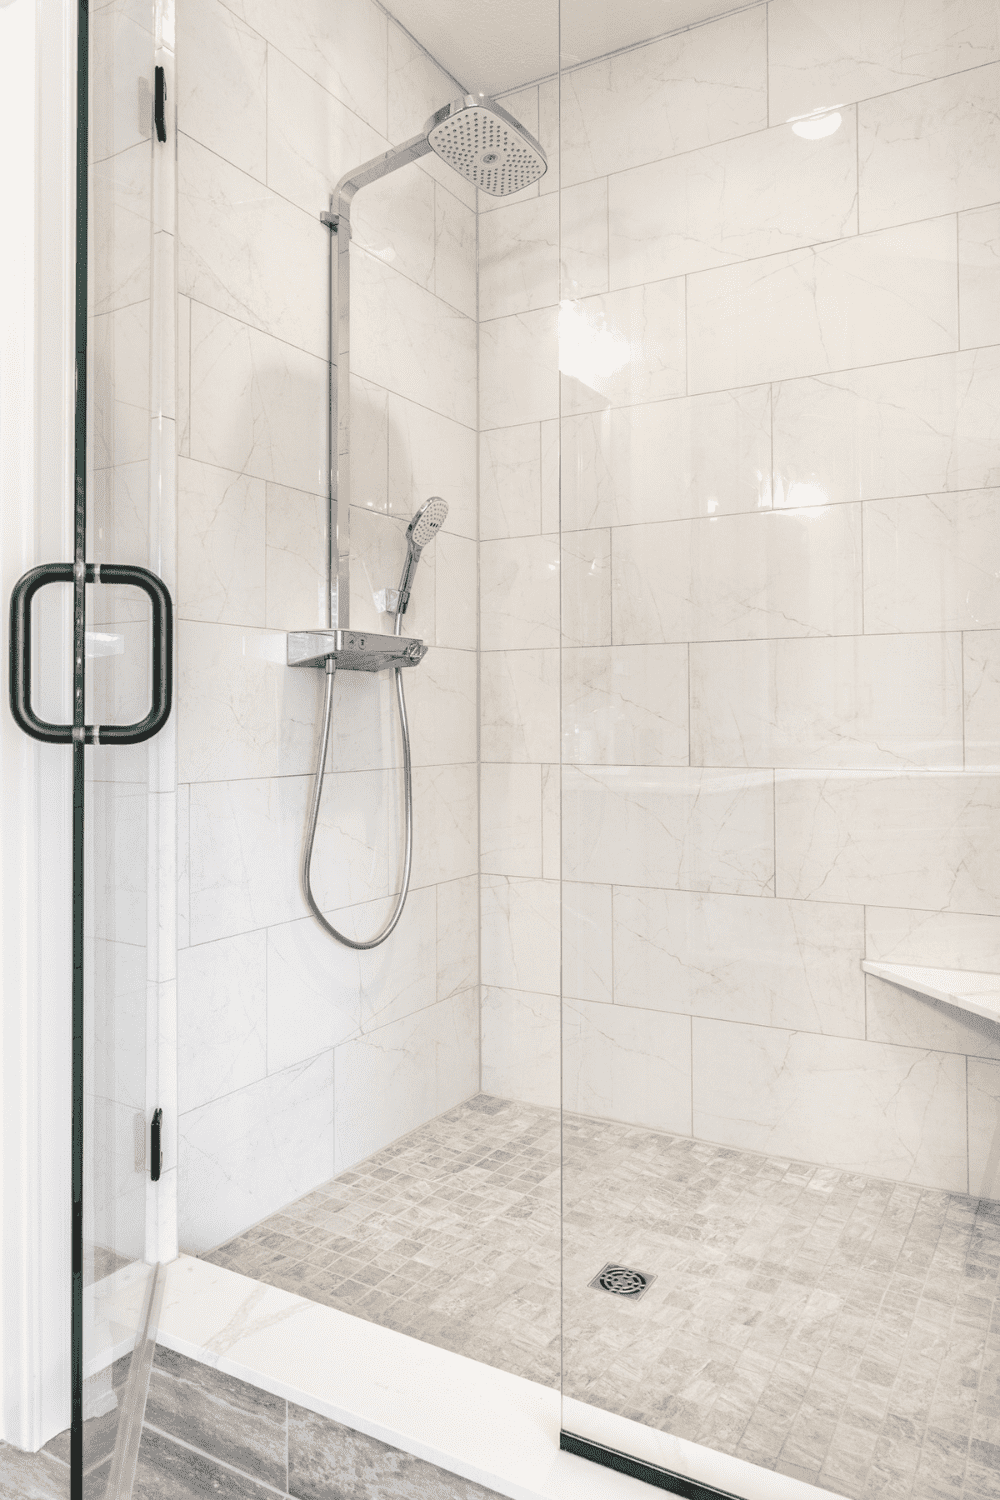 Nicholas Design Build | A master bath remodel with a white tiled shower and glass door.